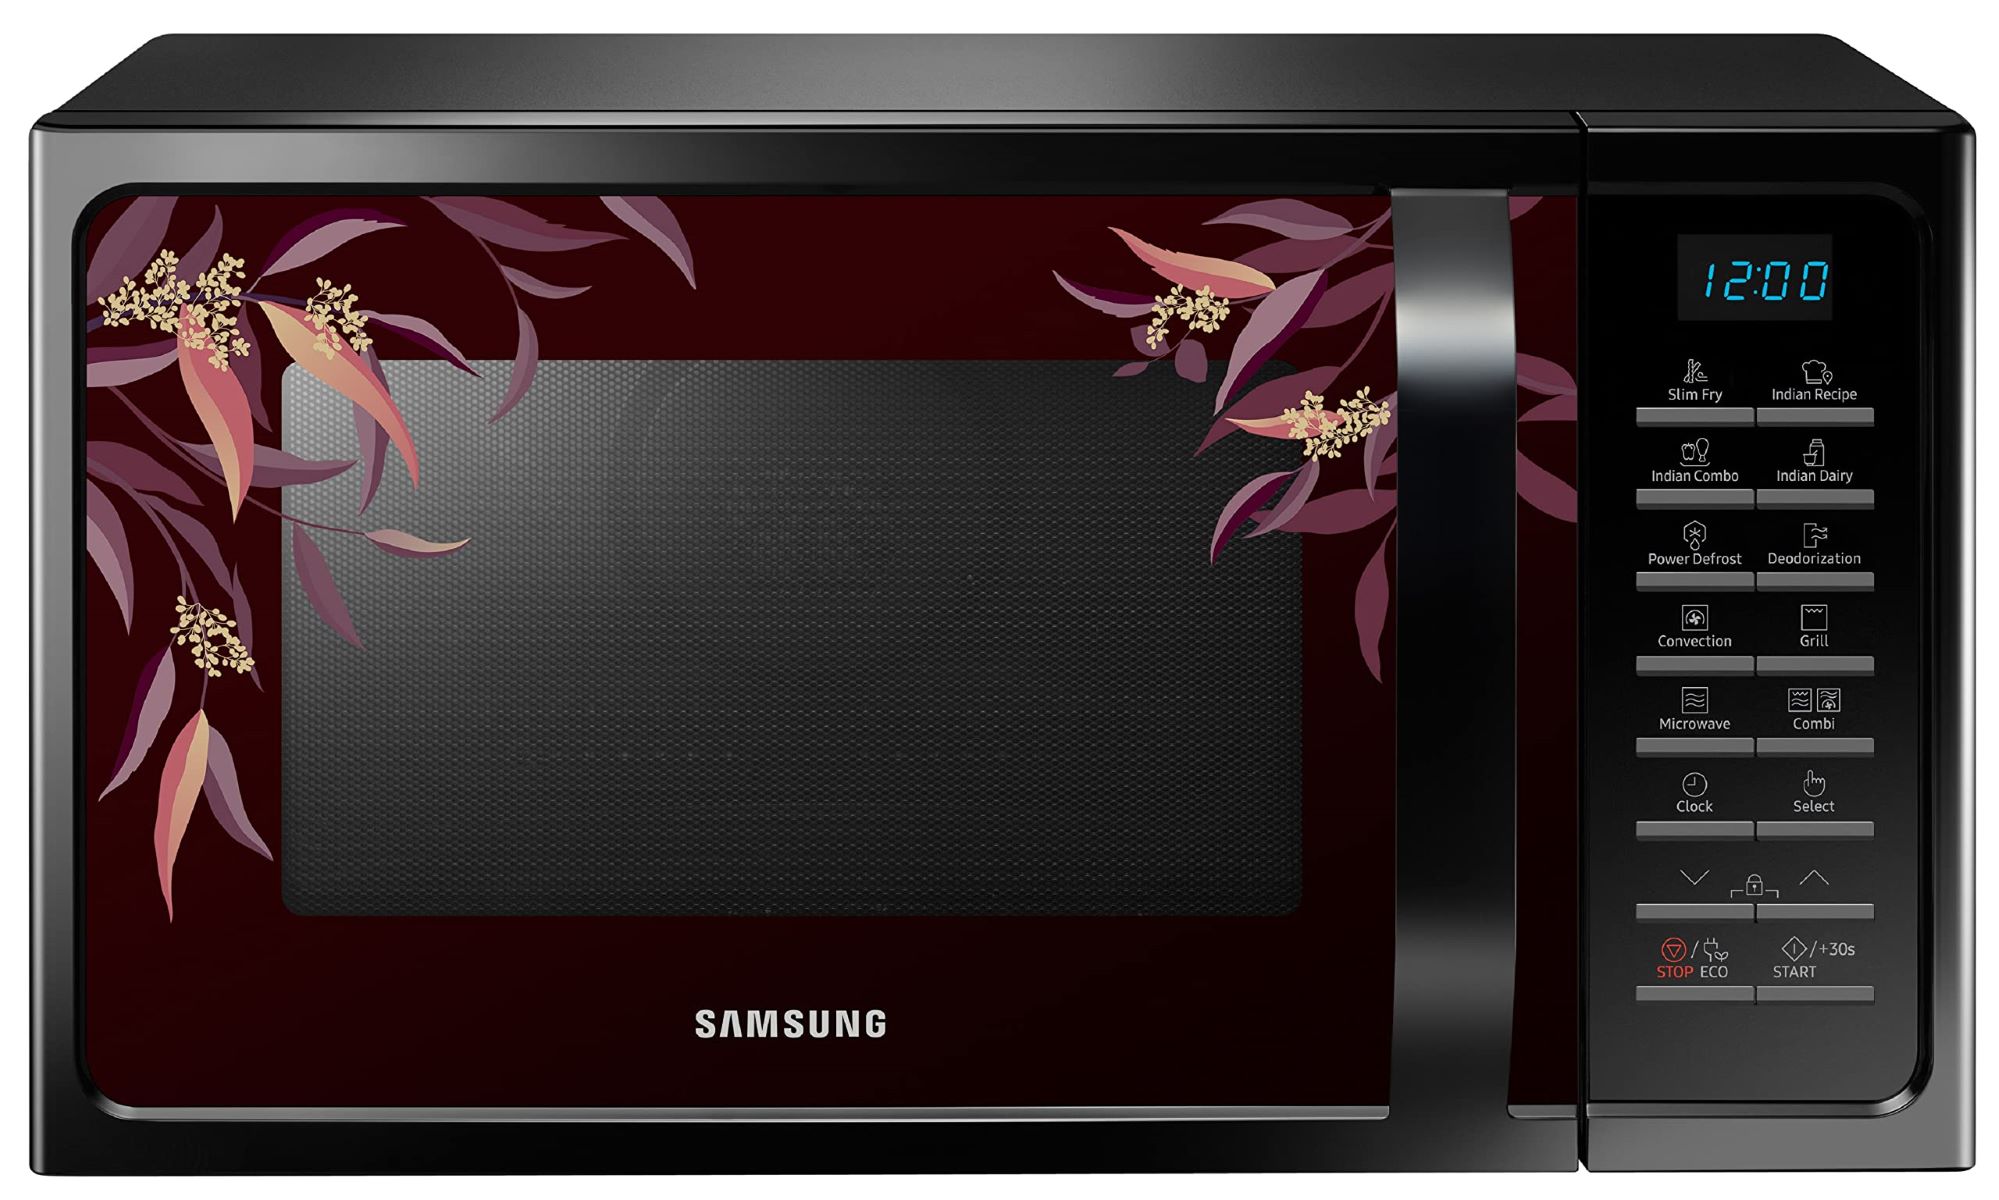 How To Fix The Error Code E-59 For Samsung Convection Oven